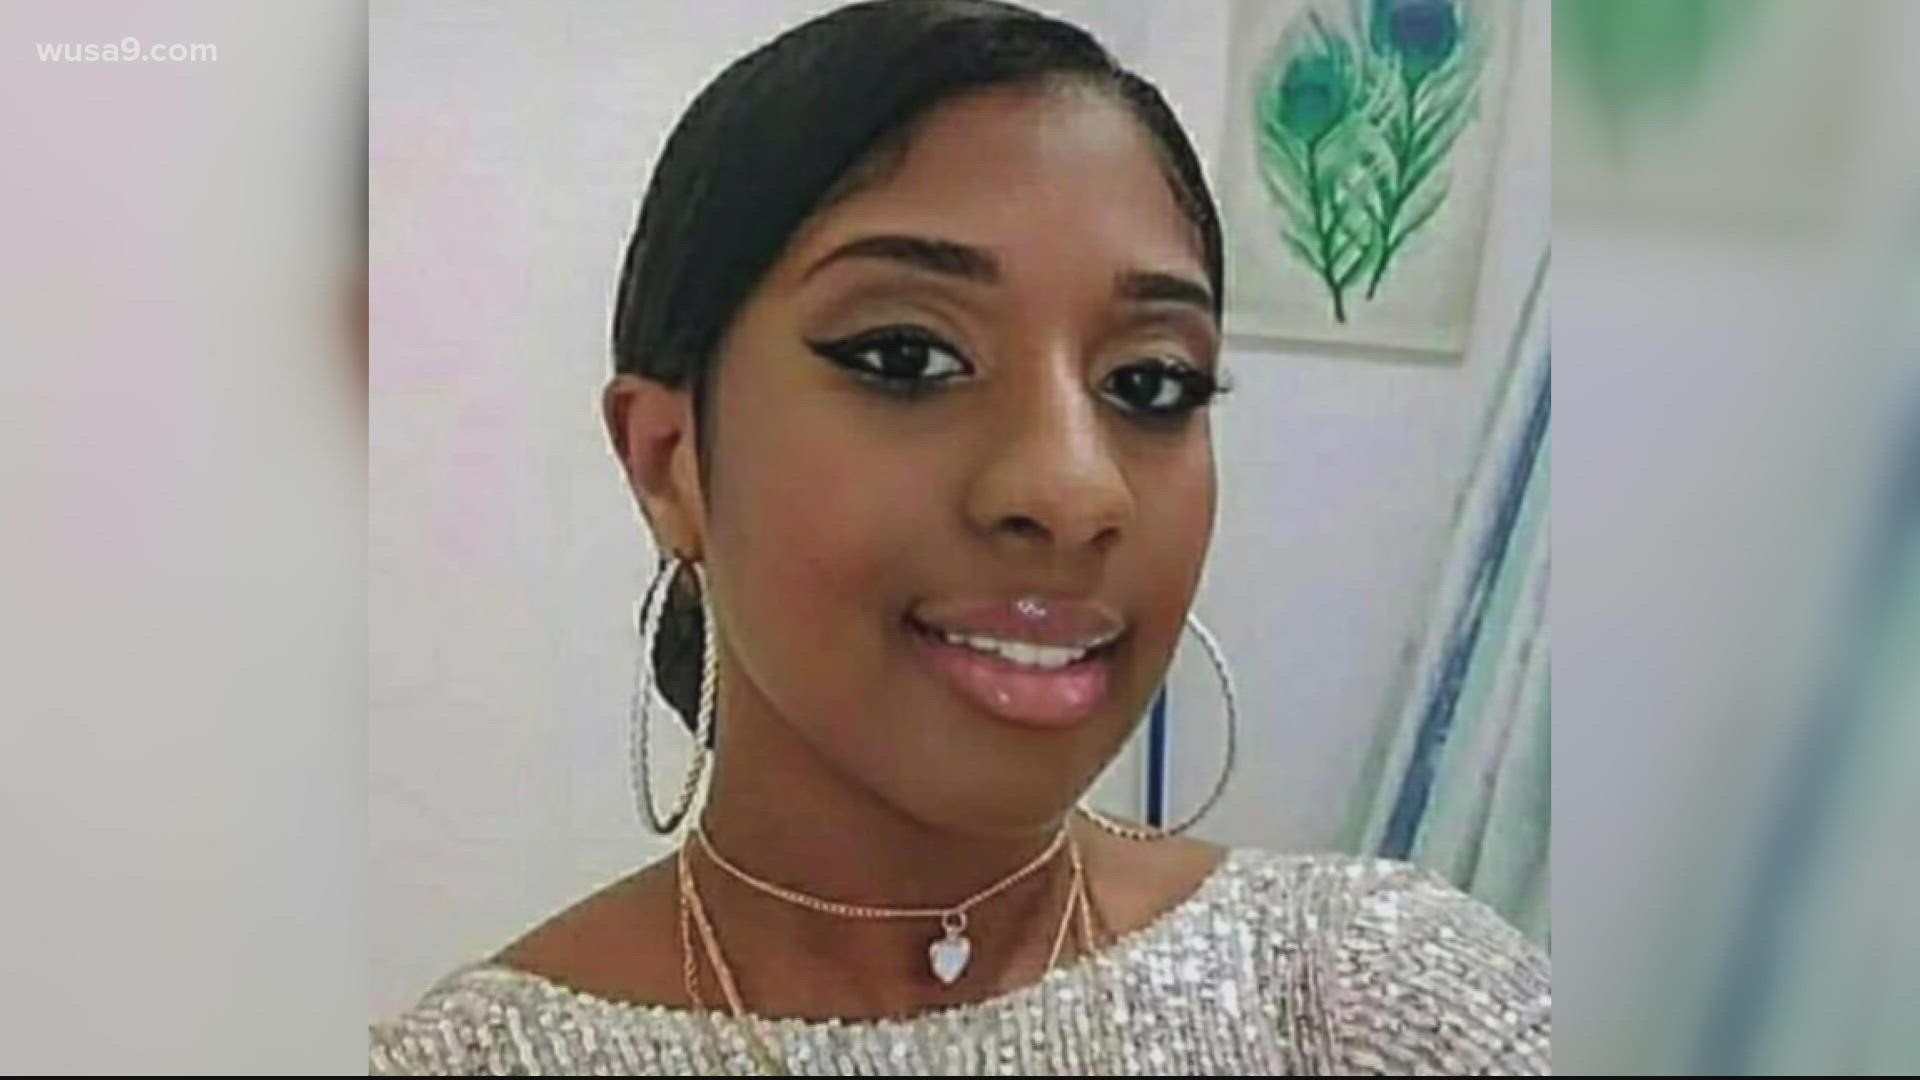 Portia Pleasant learned of the body that was found along I-295 after seeing news on social media. Later on, she found out about the tragic connection to her sister.